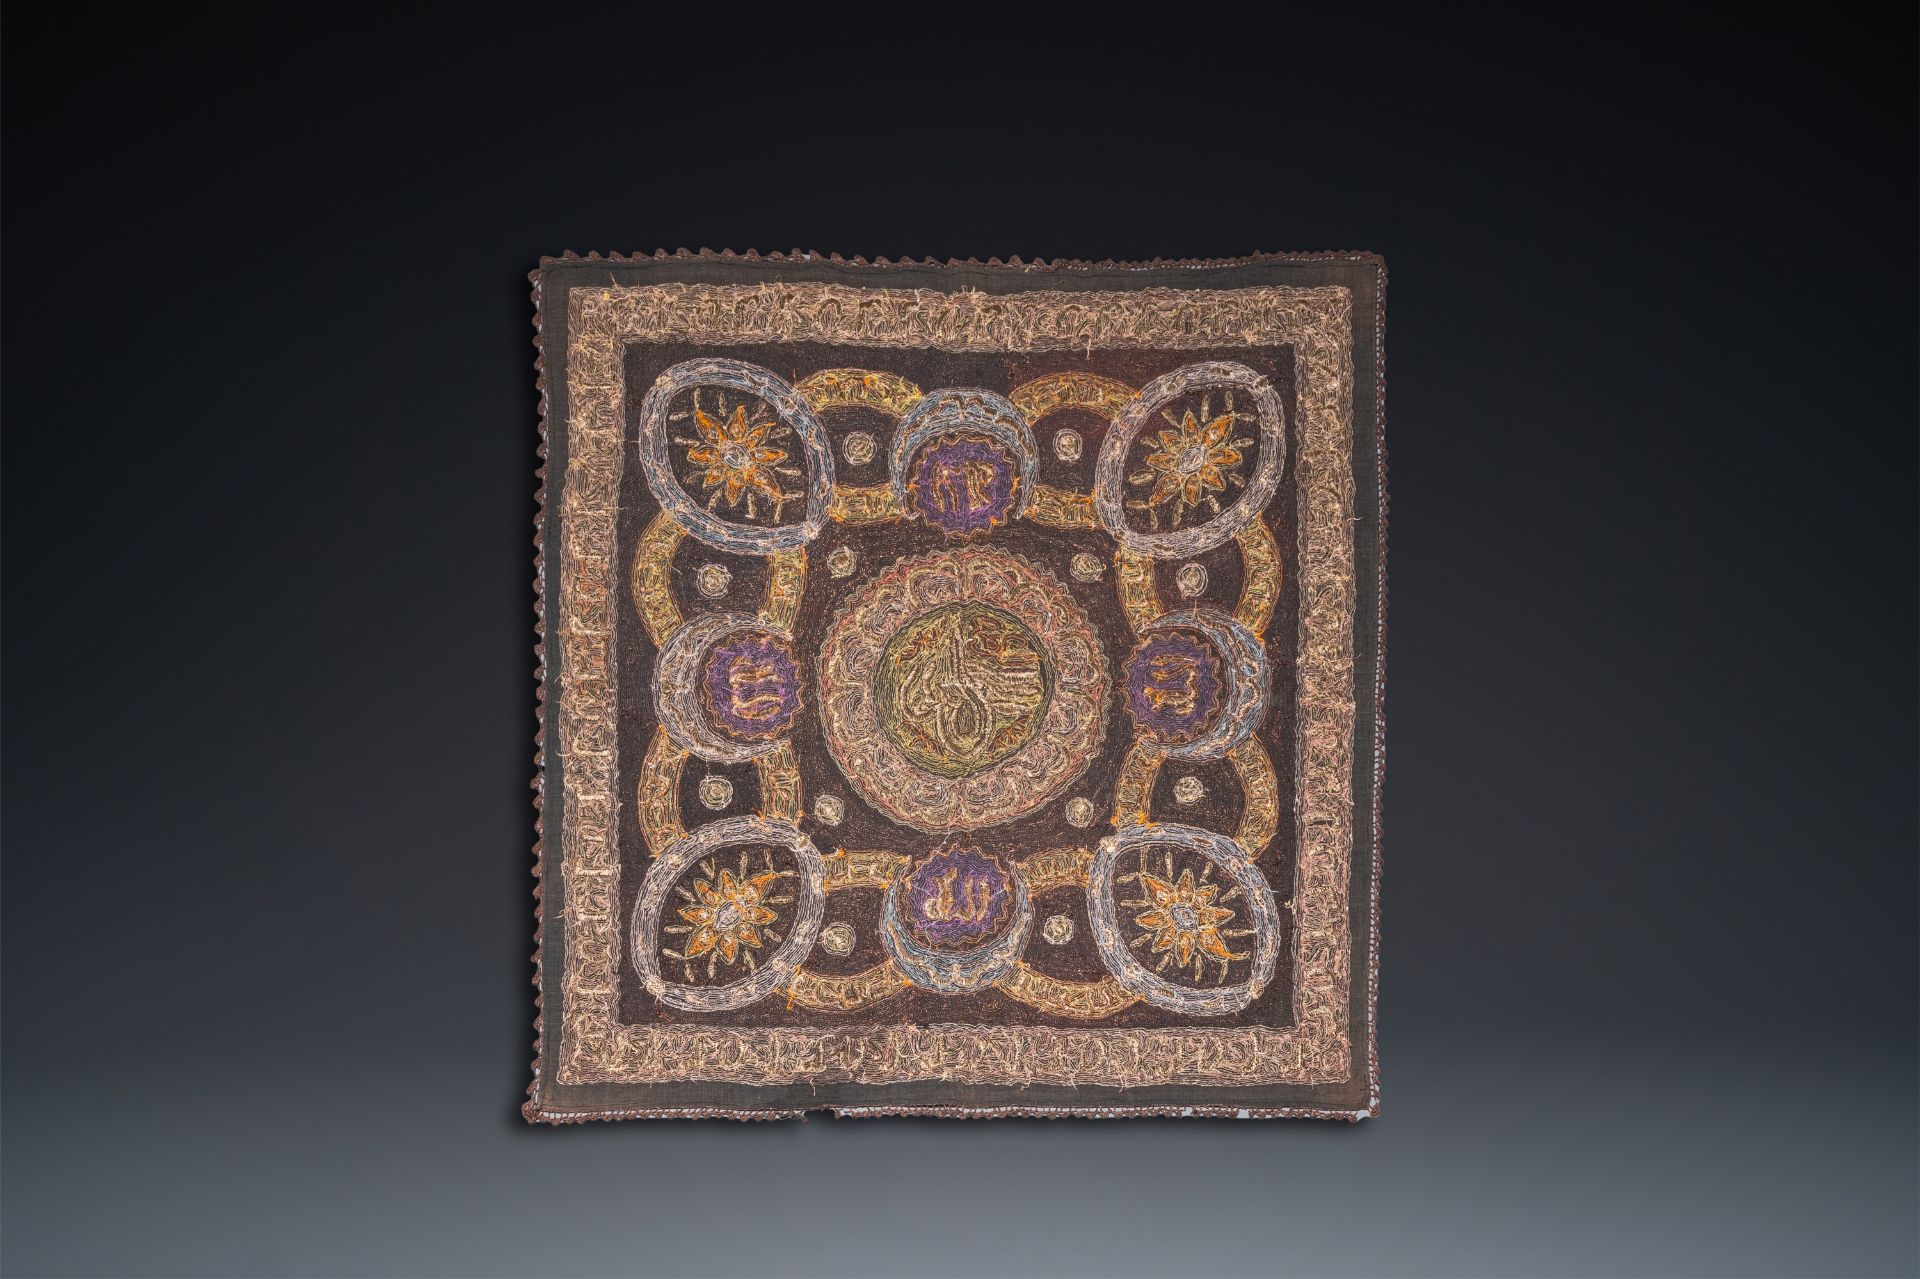 An Ottoman metal-thread-embroidered table cover, Turkey, 19th C. - Image 2 of 2